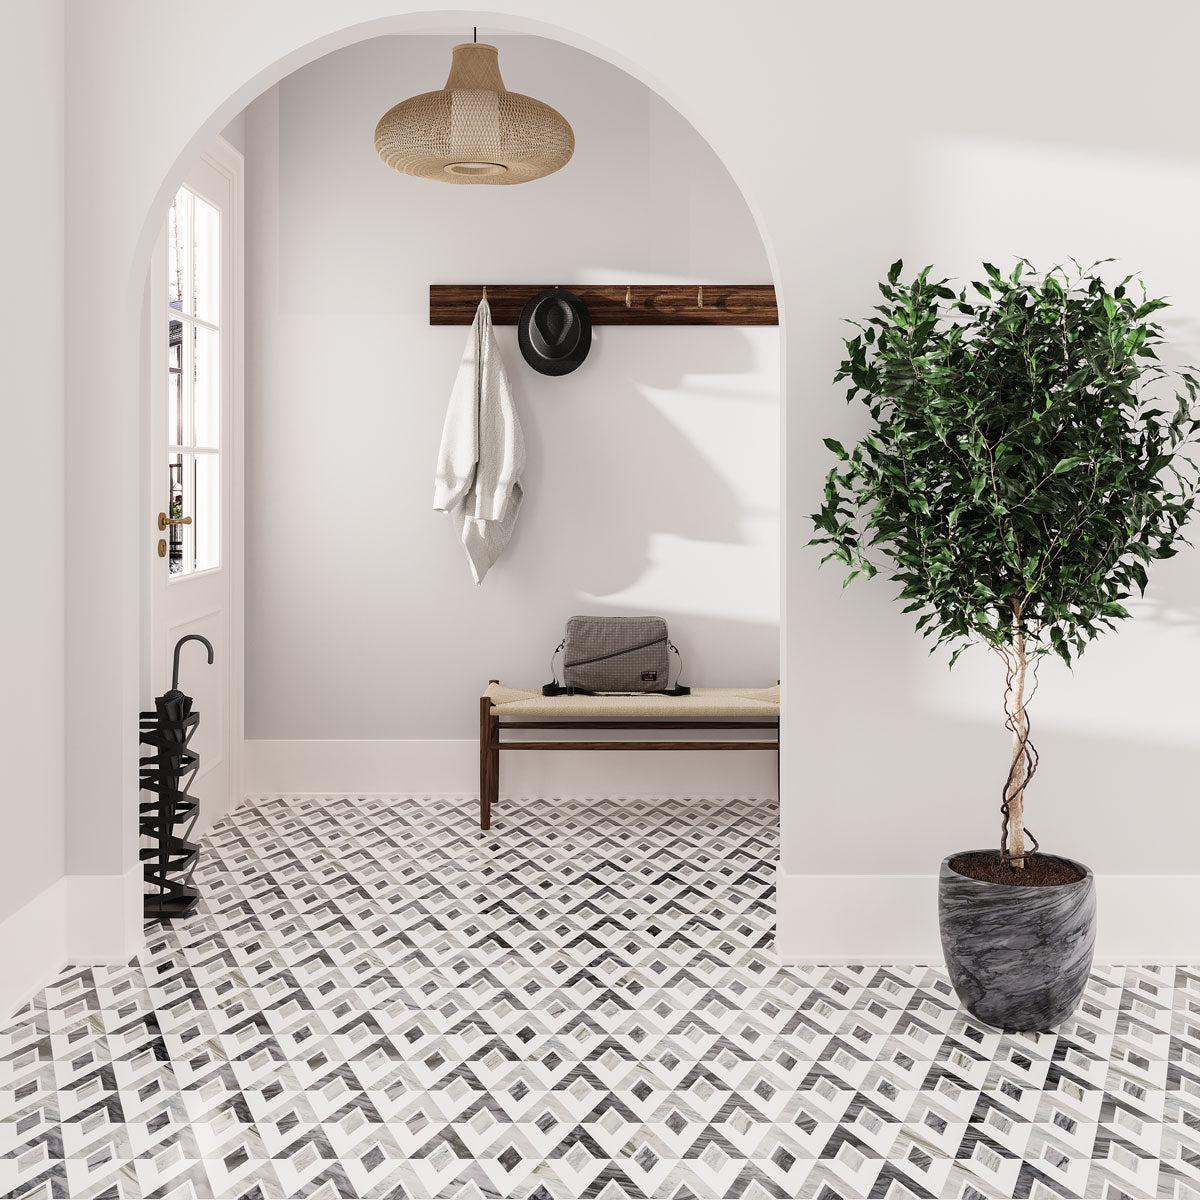 Entryway with an arched doorway and patterned floor tile